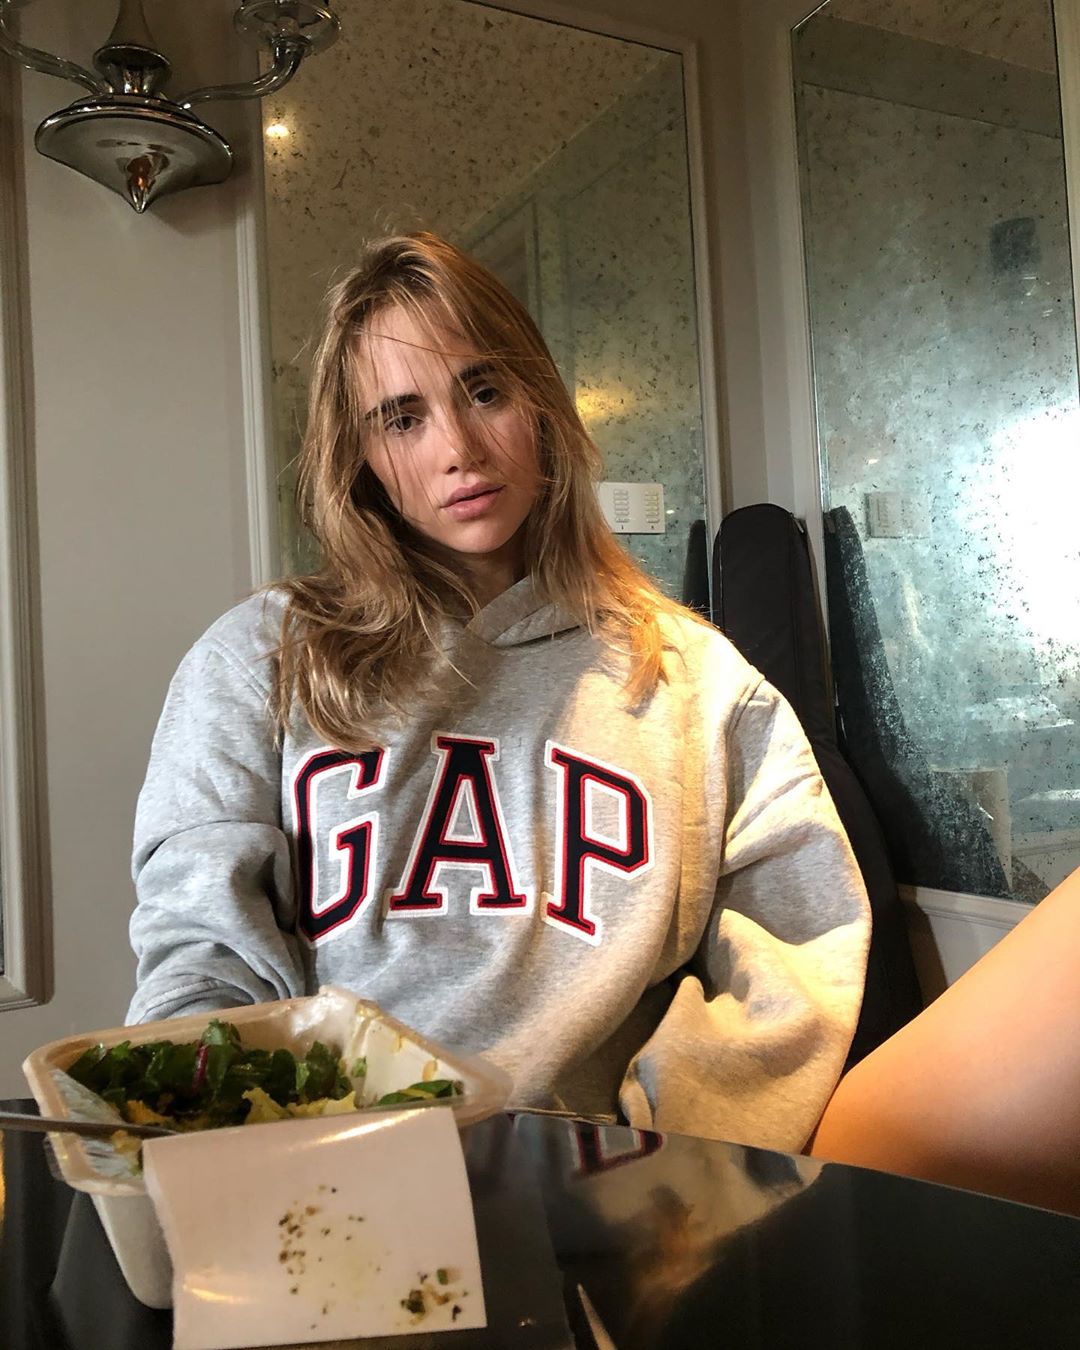 Suki Waterhouse Brings Her Soon to Be Baby on a Trip! - Photo 13